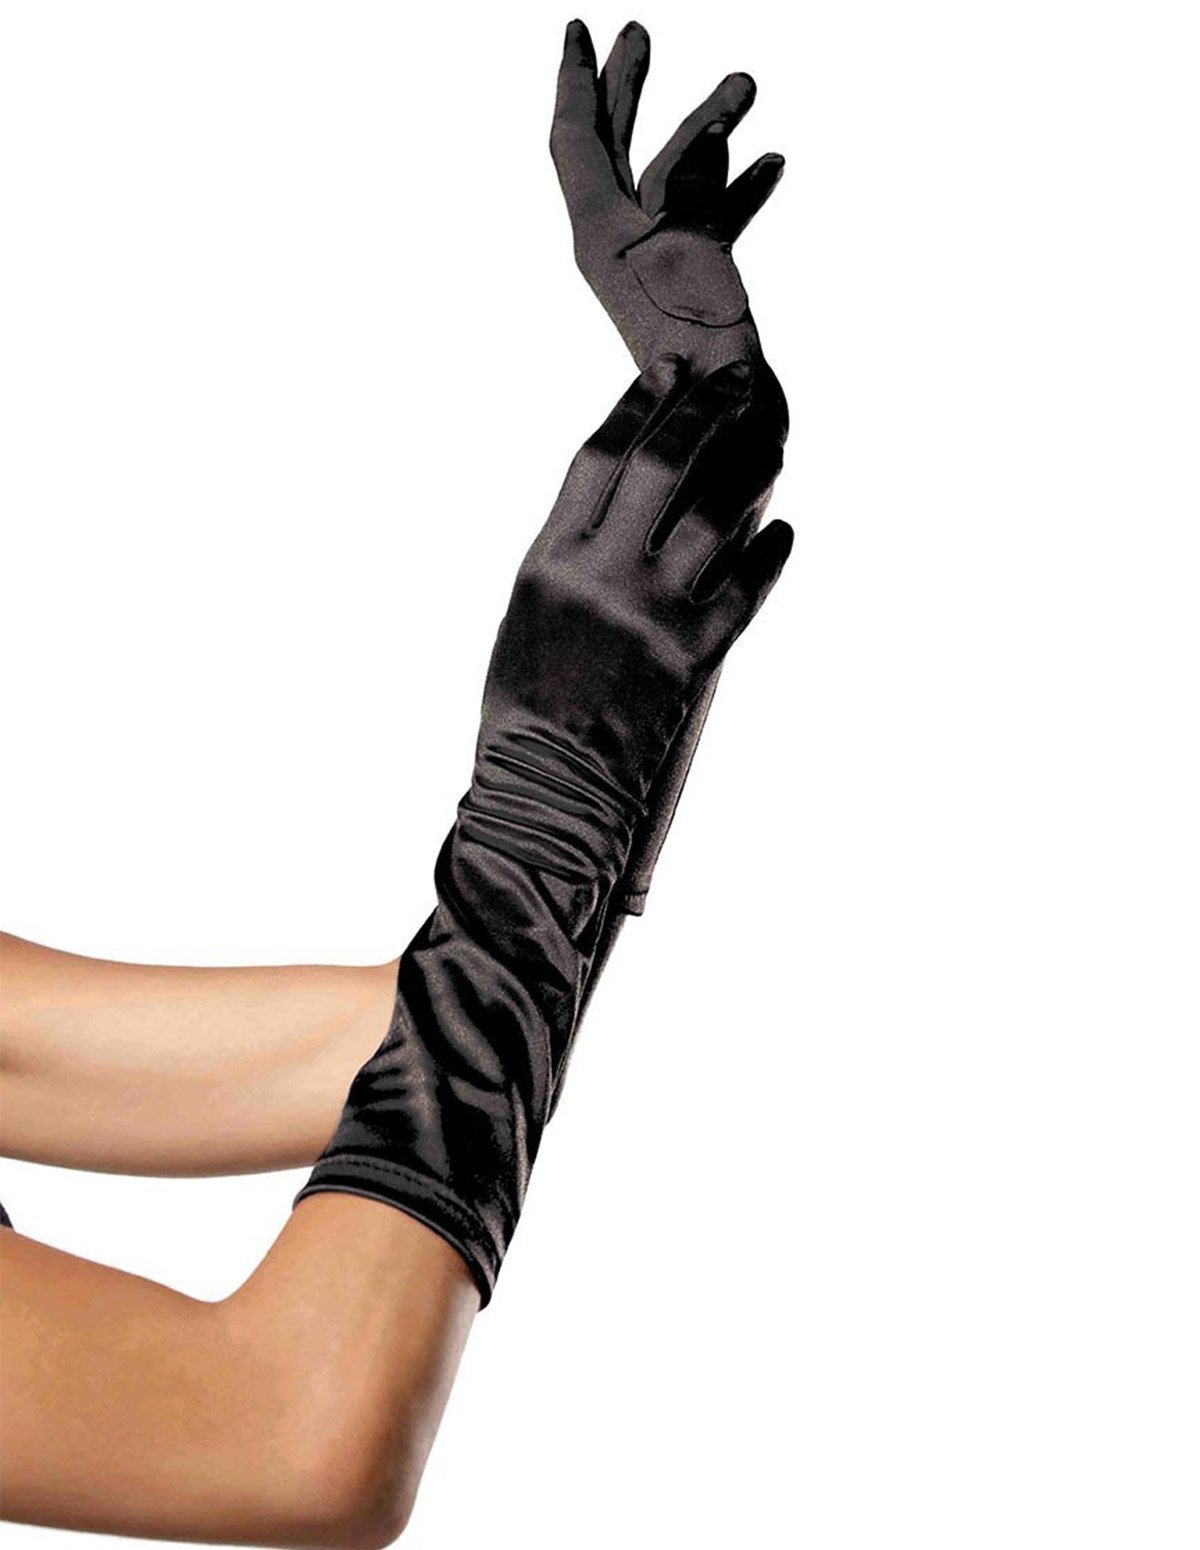 Gloves Category Image